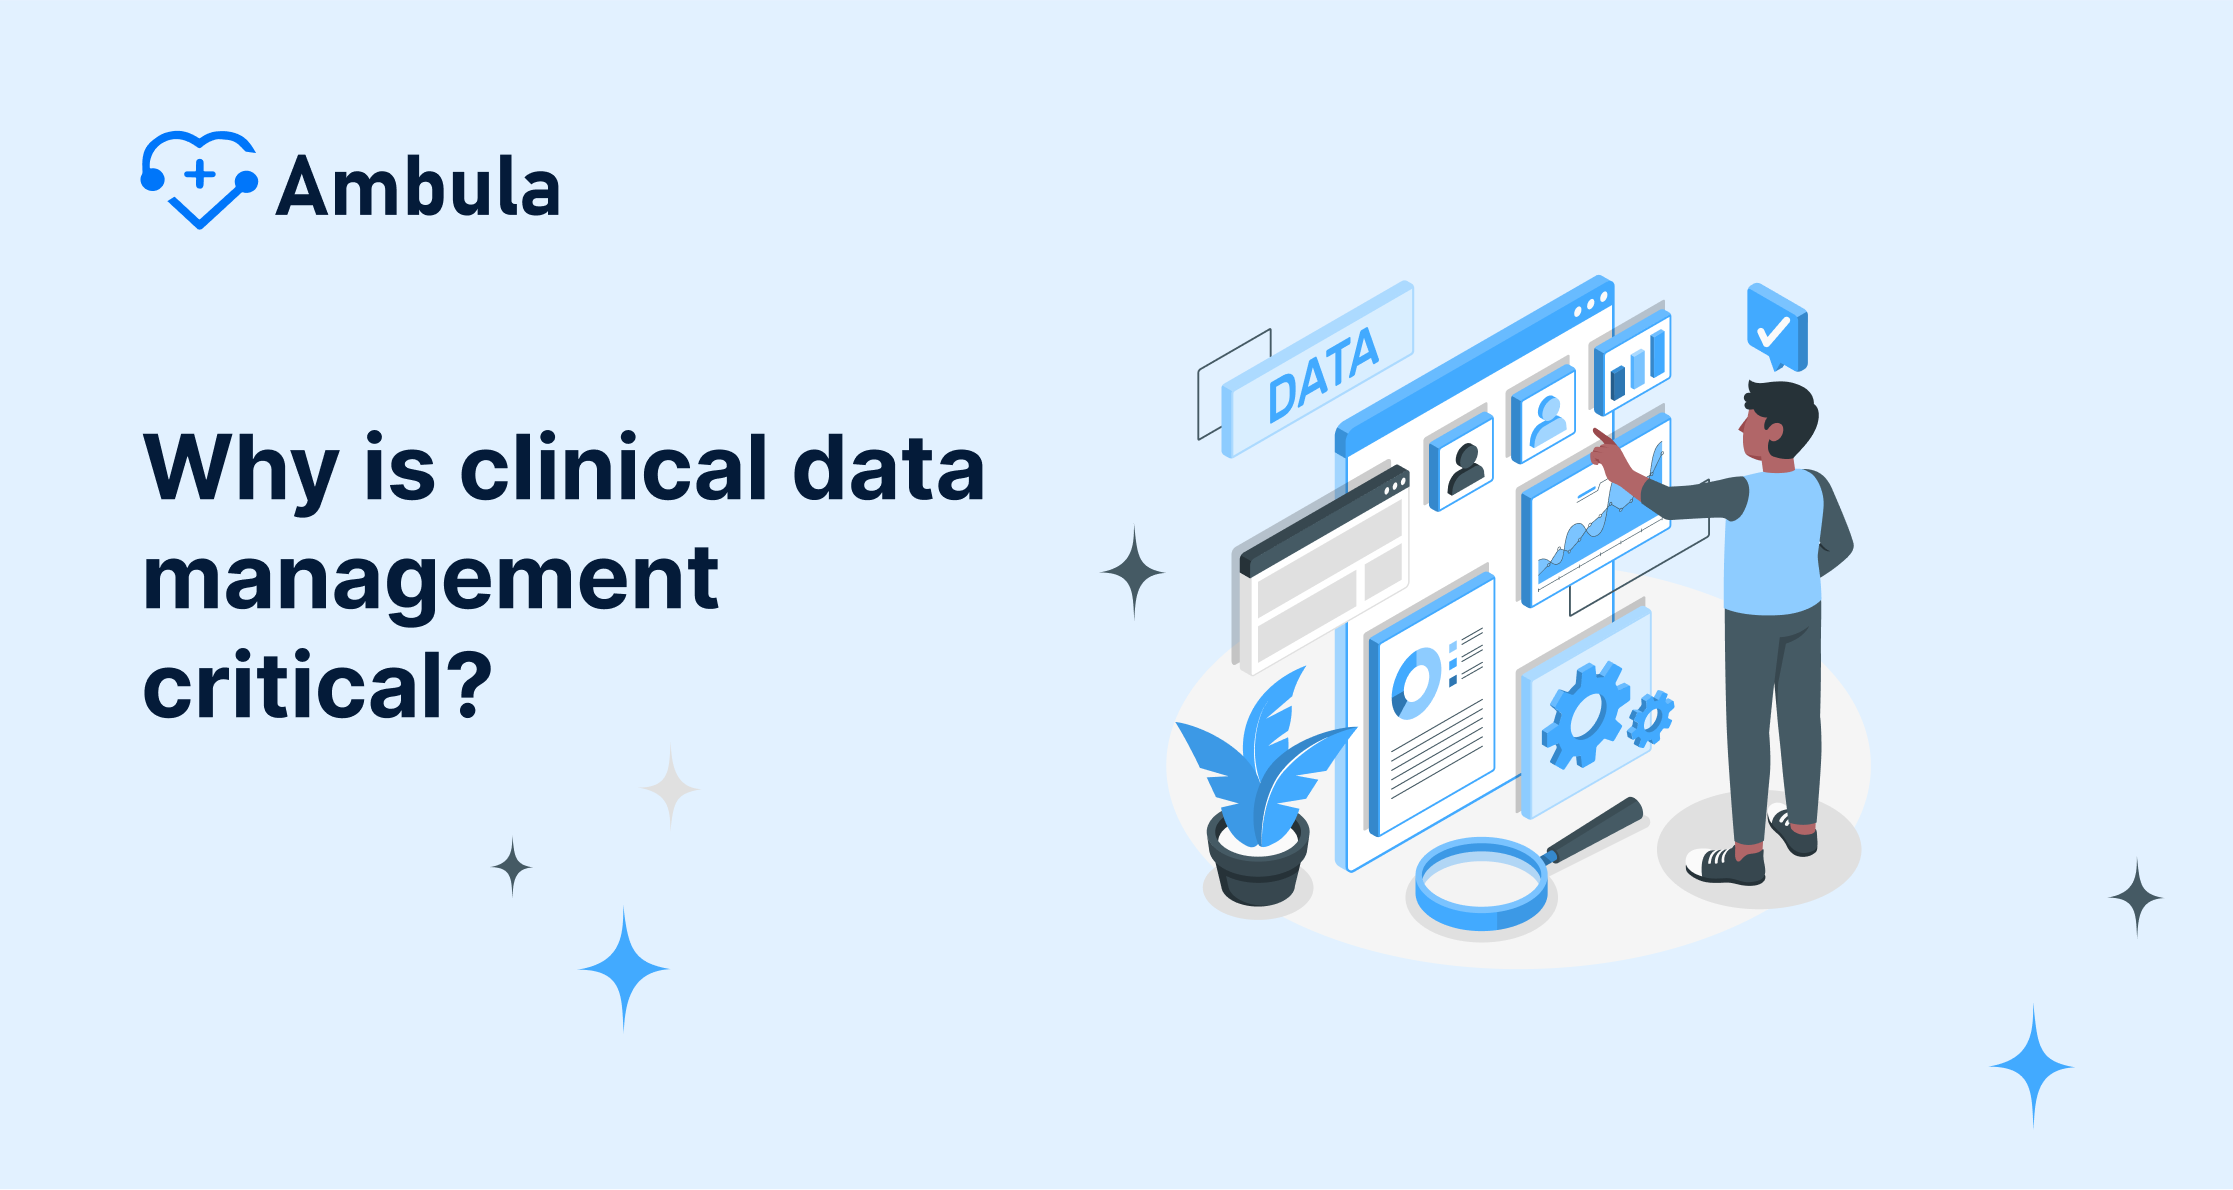 Why is clinical data management critical?